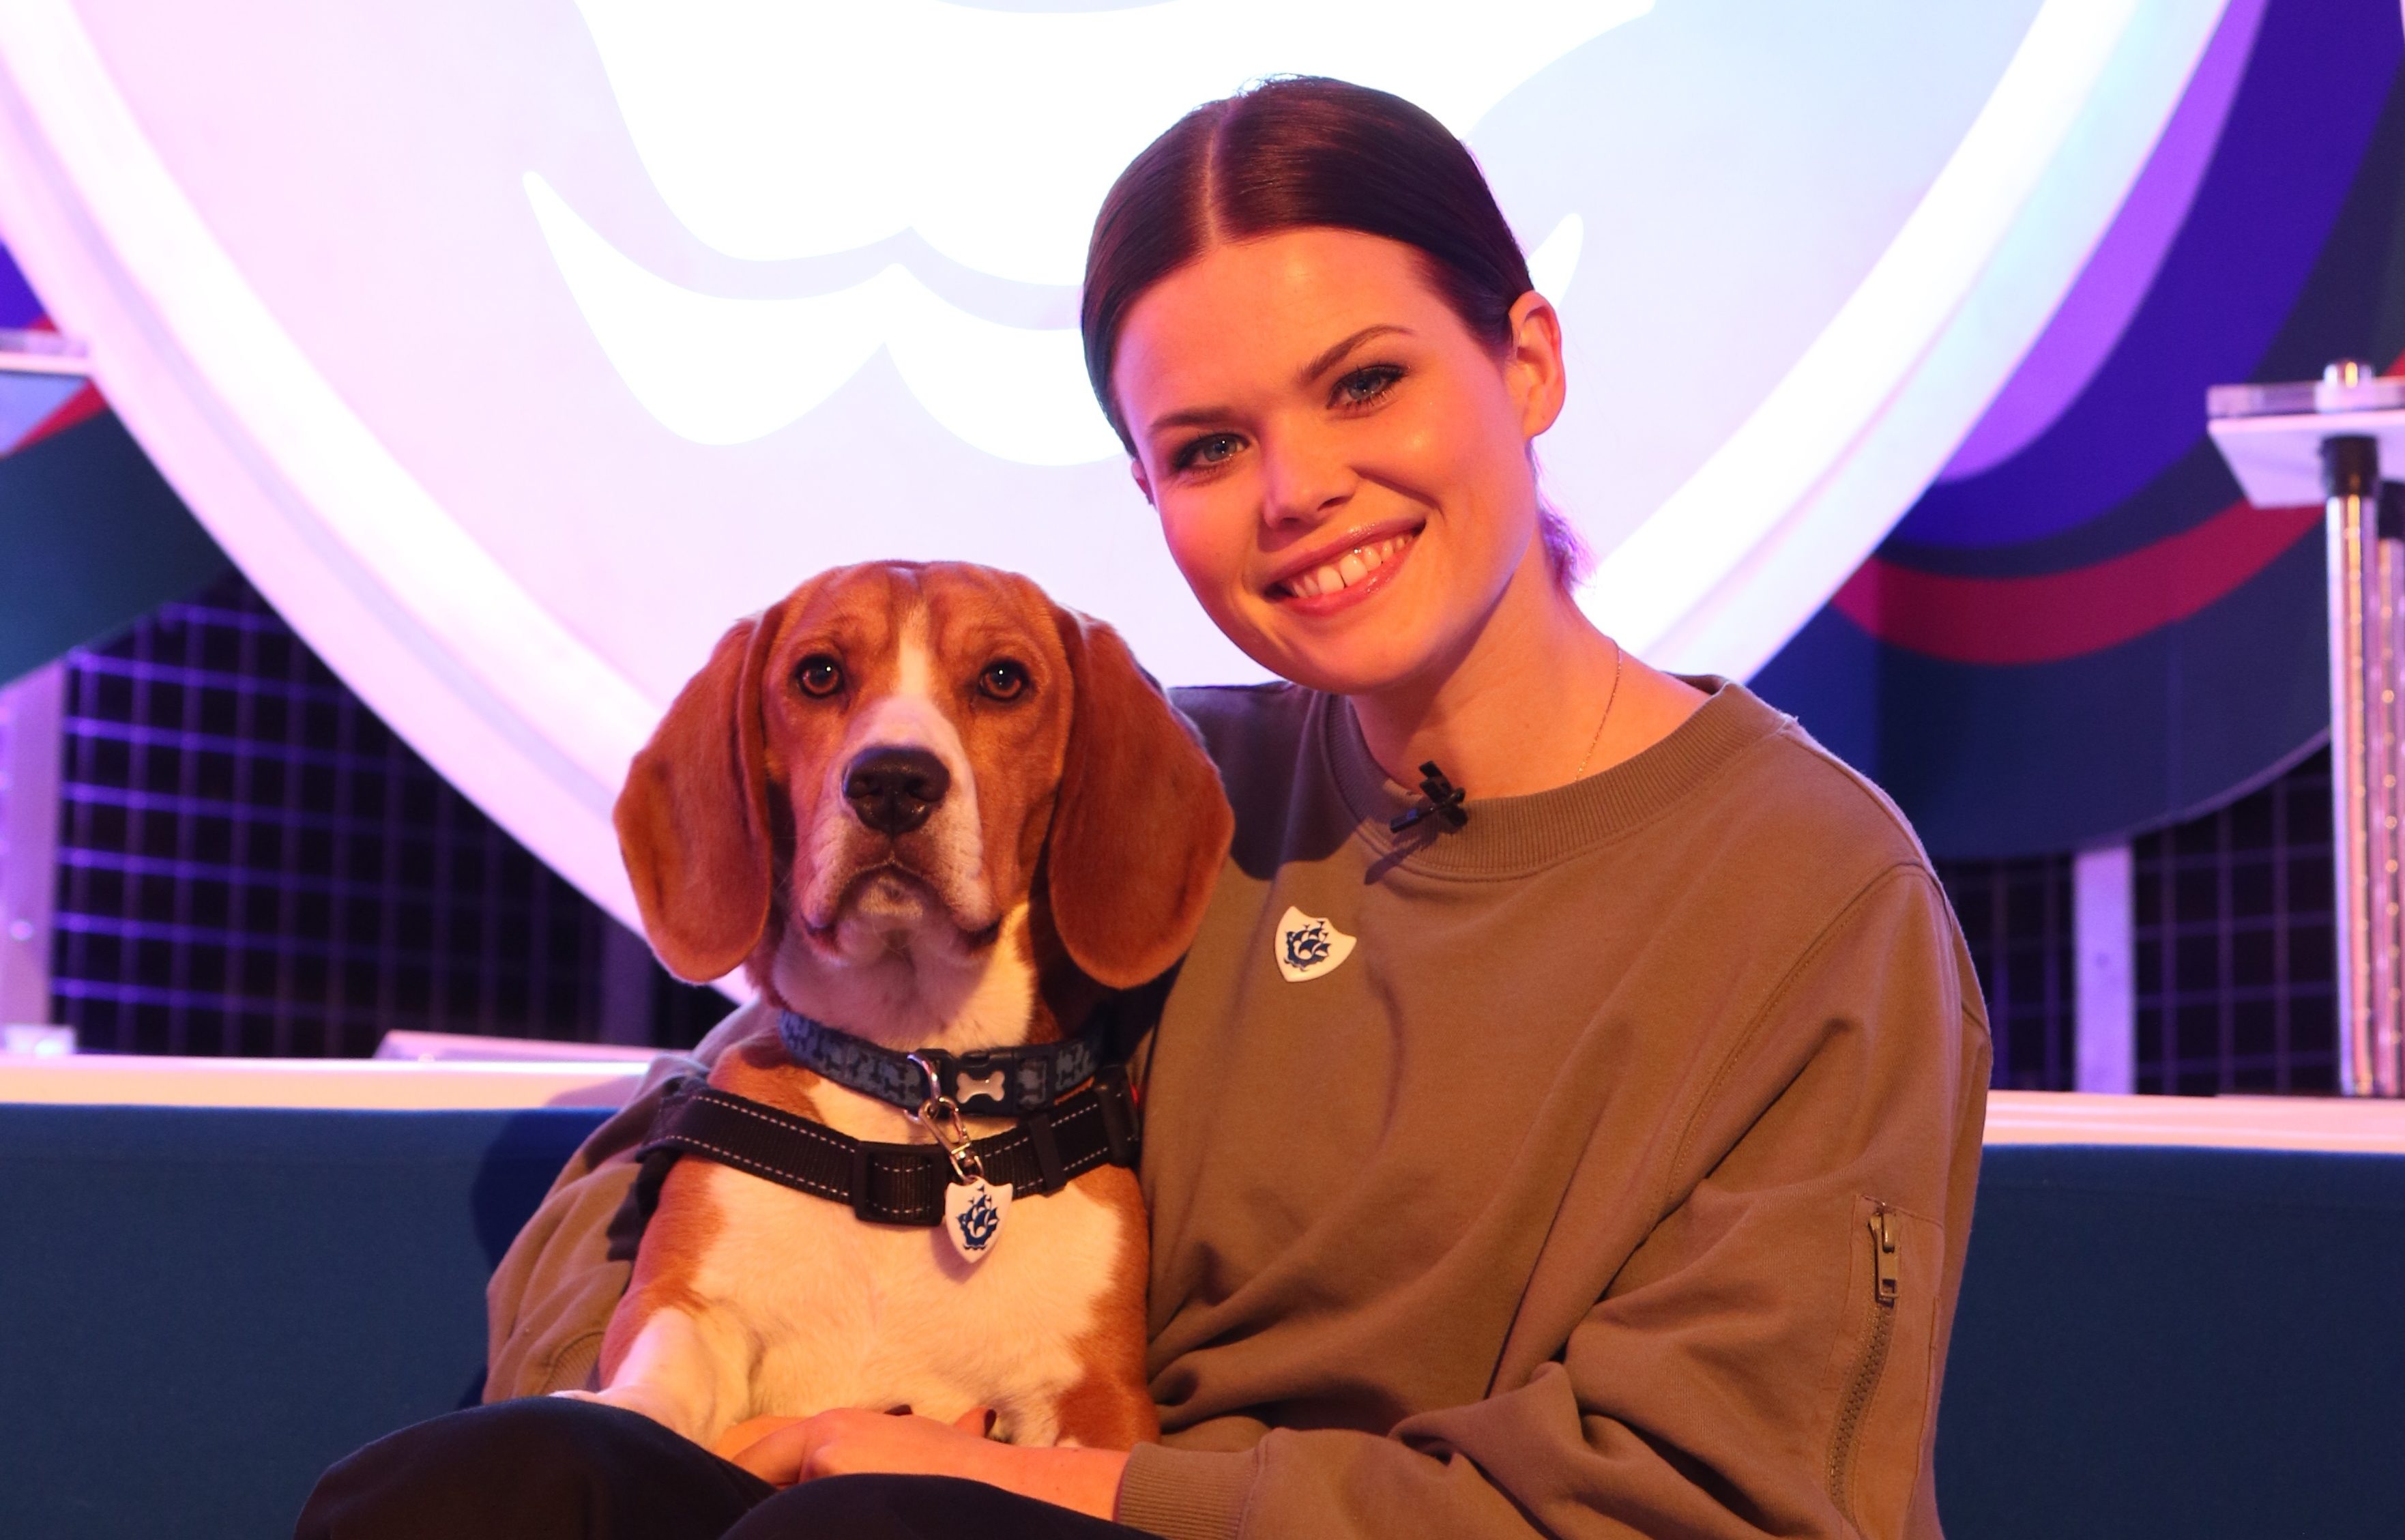 Blue Peter presenter Lindsey Russell with the show's latest dog, a beagle-basset hound cross called Henry